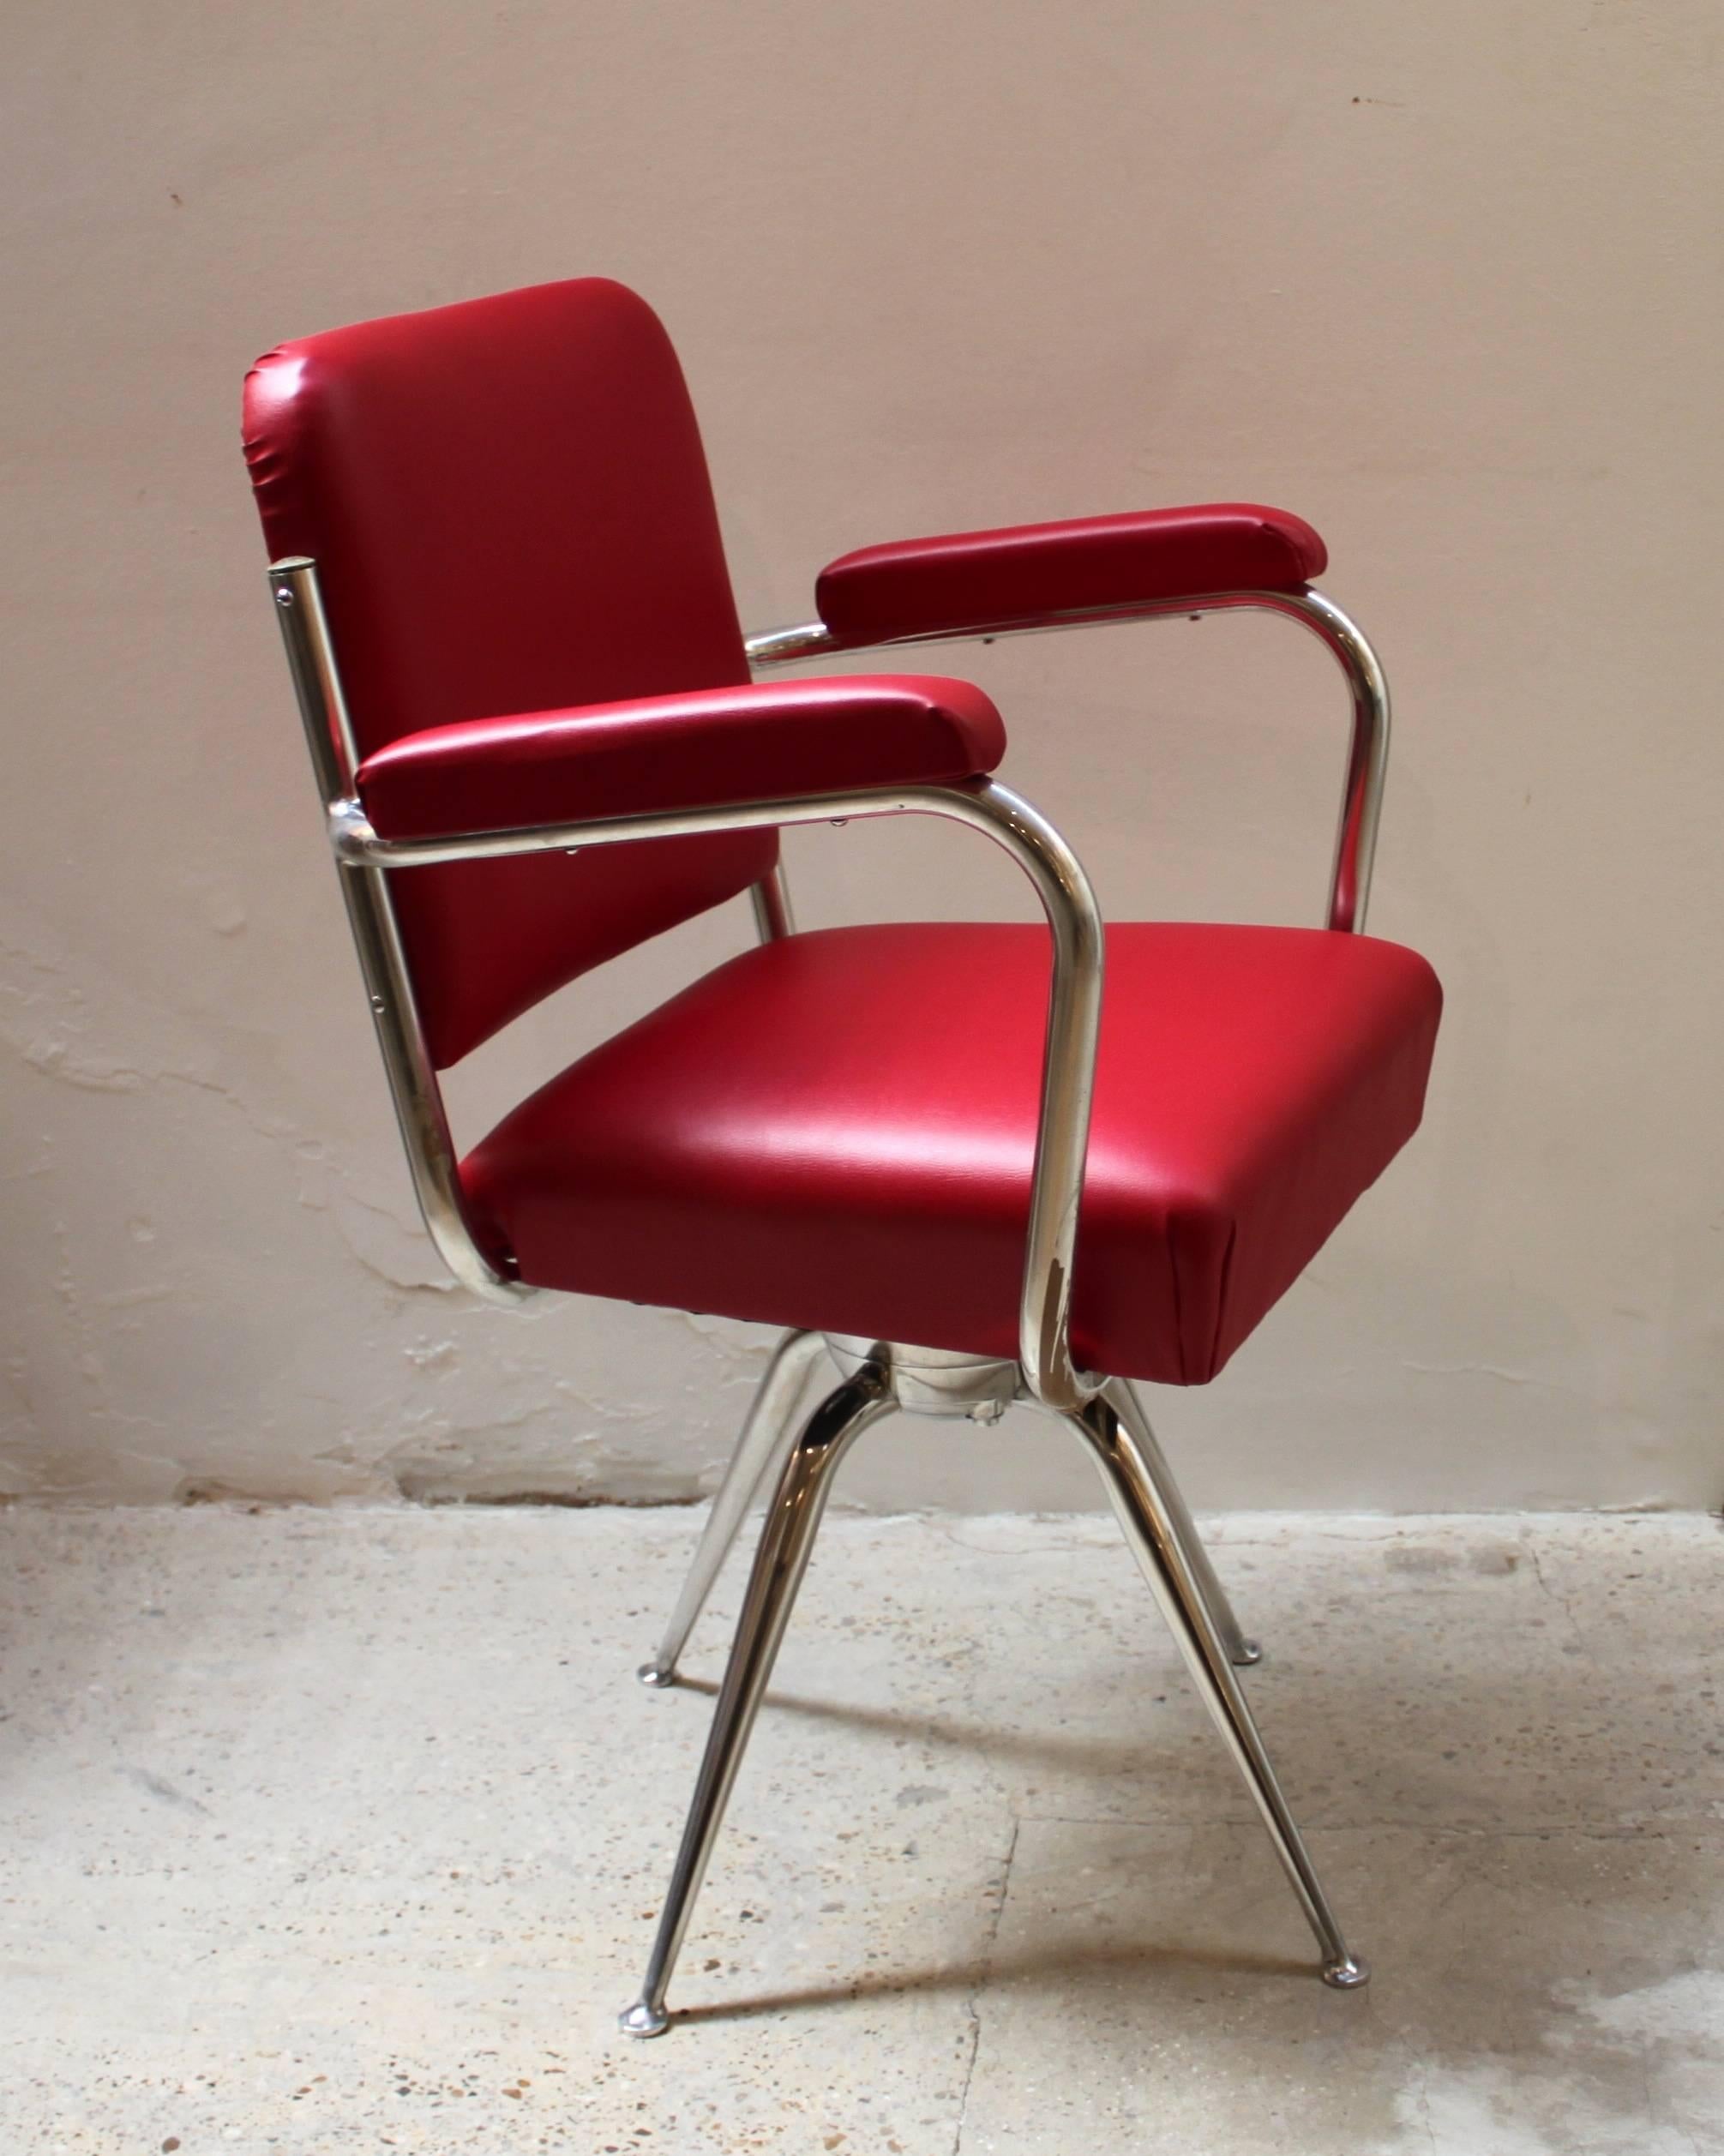 Elegant chrome and red leather desk chair in the style of Gio Ponti.
 